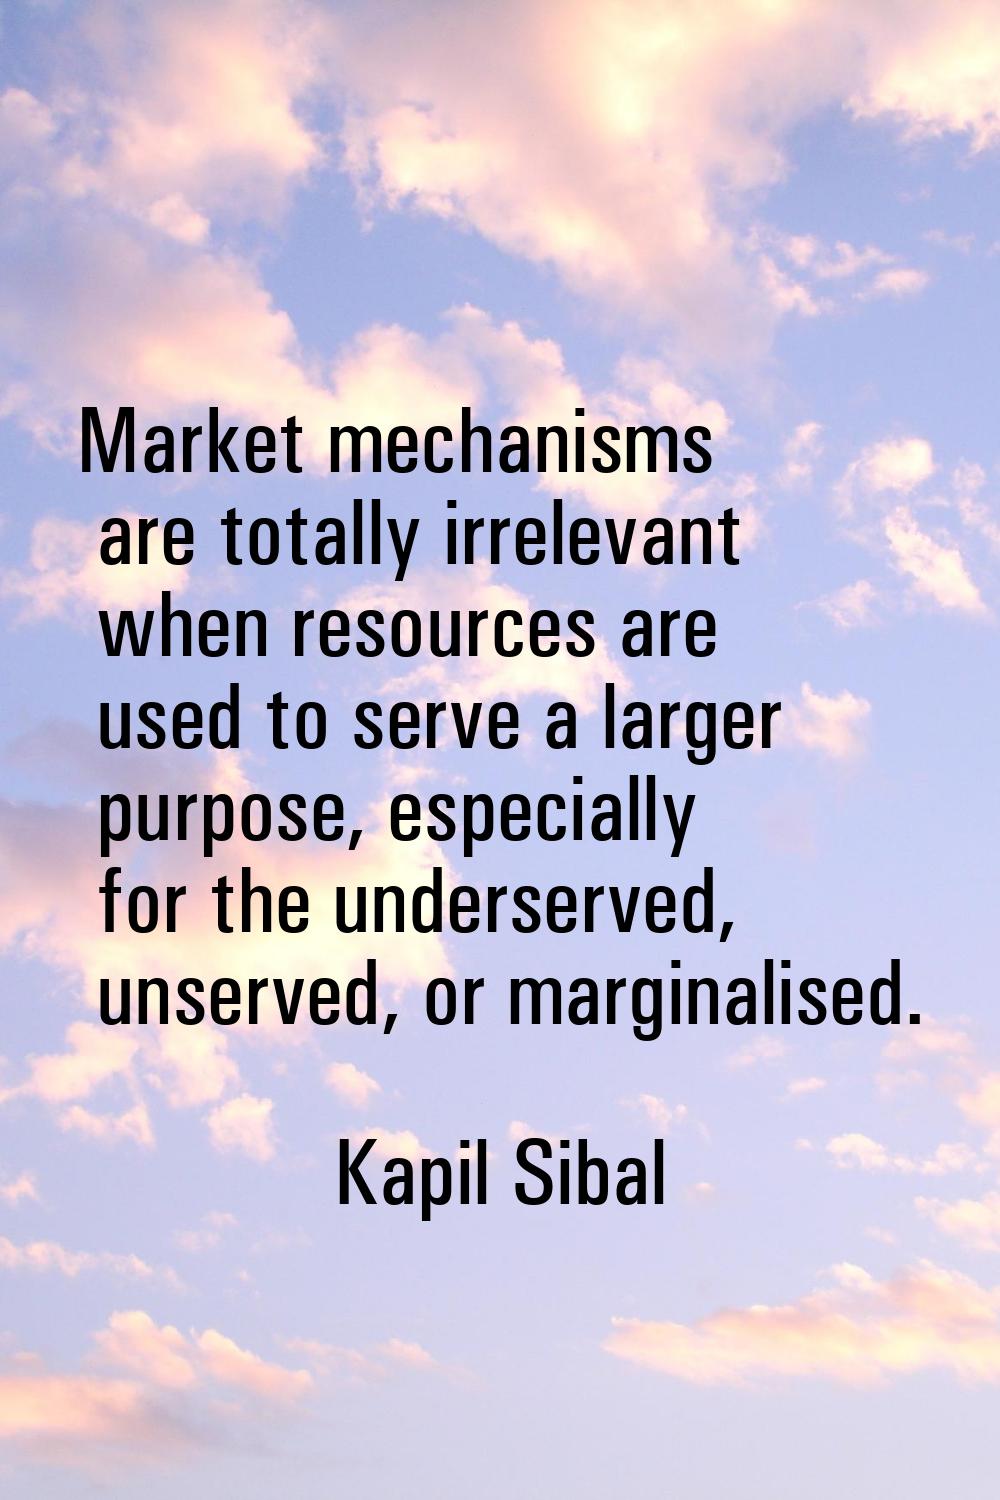 Market mechanisms are totally irrelevant when resources are used to serve a larger purpose, especia